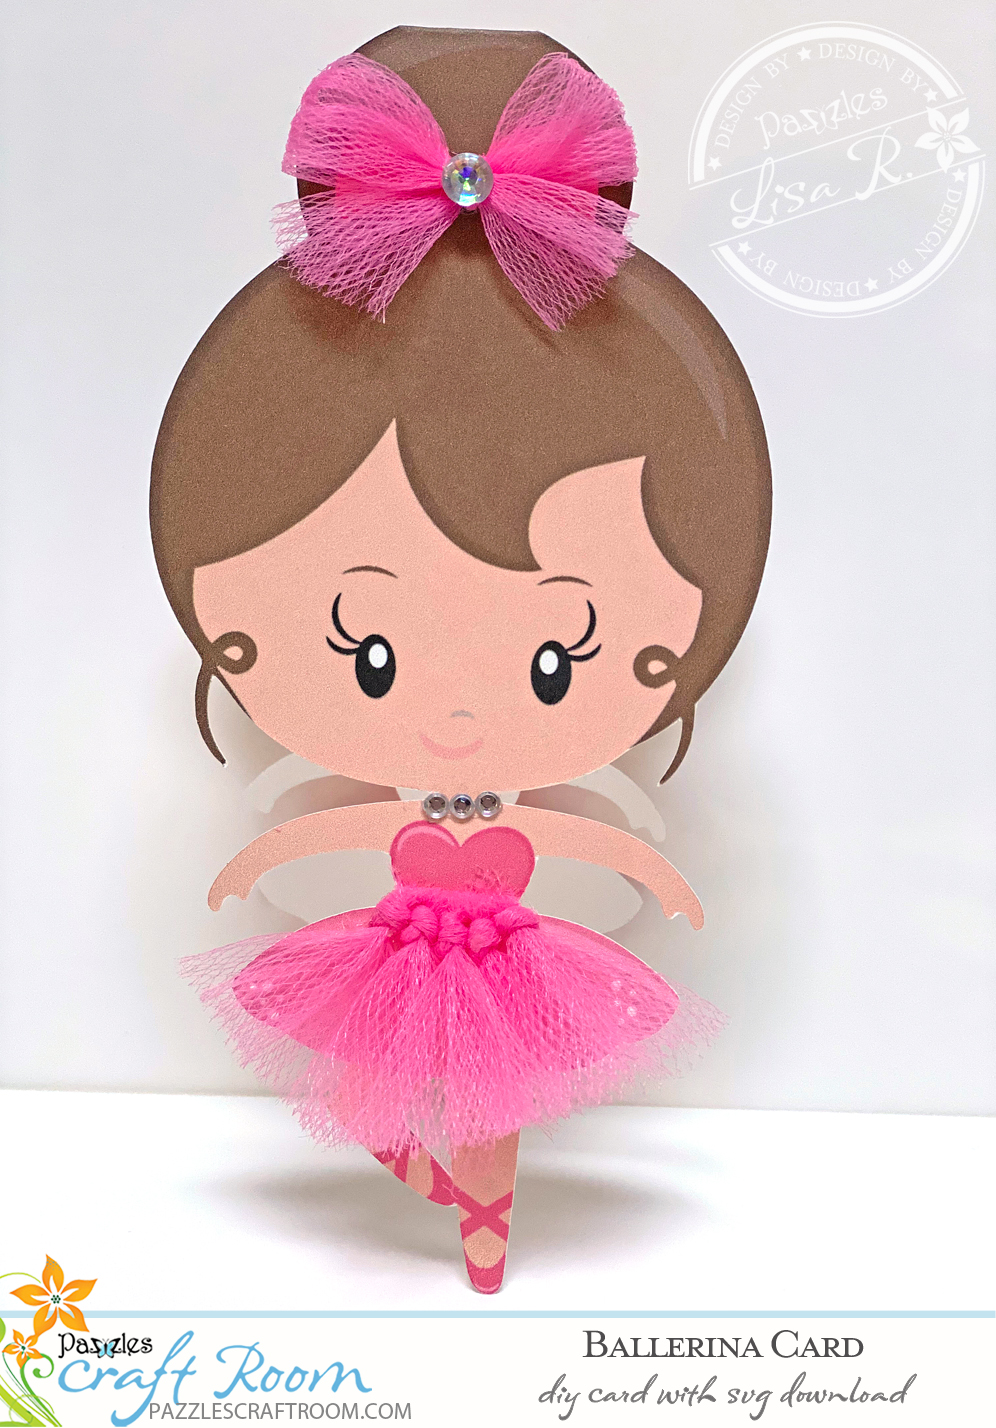 Pazzles DIY Ballerina Card with instant SVG download. Compatible with all major electronic cutters including Pazzles Inspiration, Cricut, Silhouette Cameo. Design by Lisa Reyna.